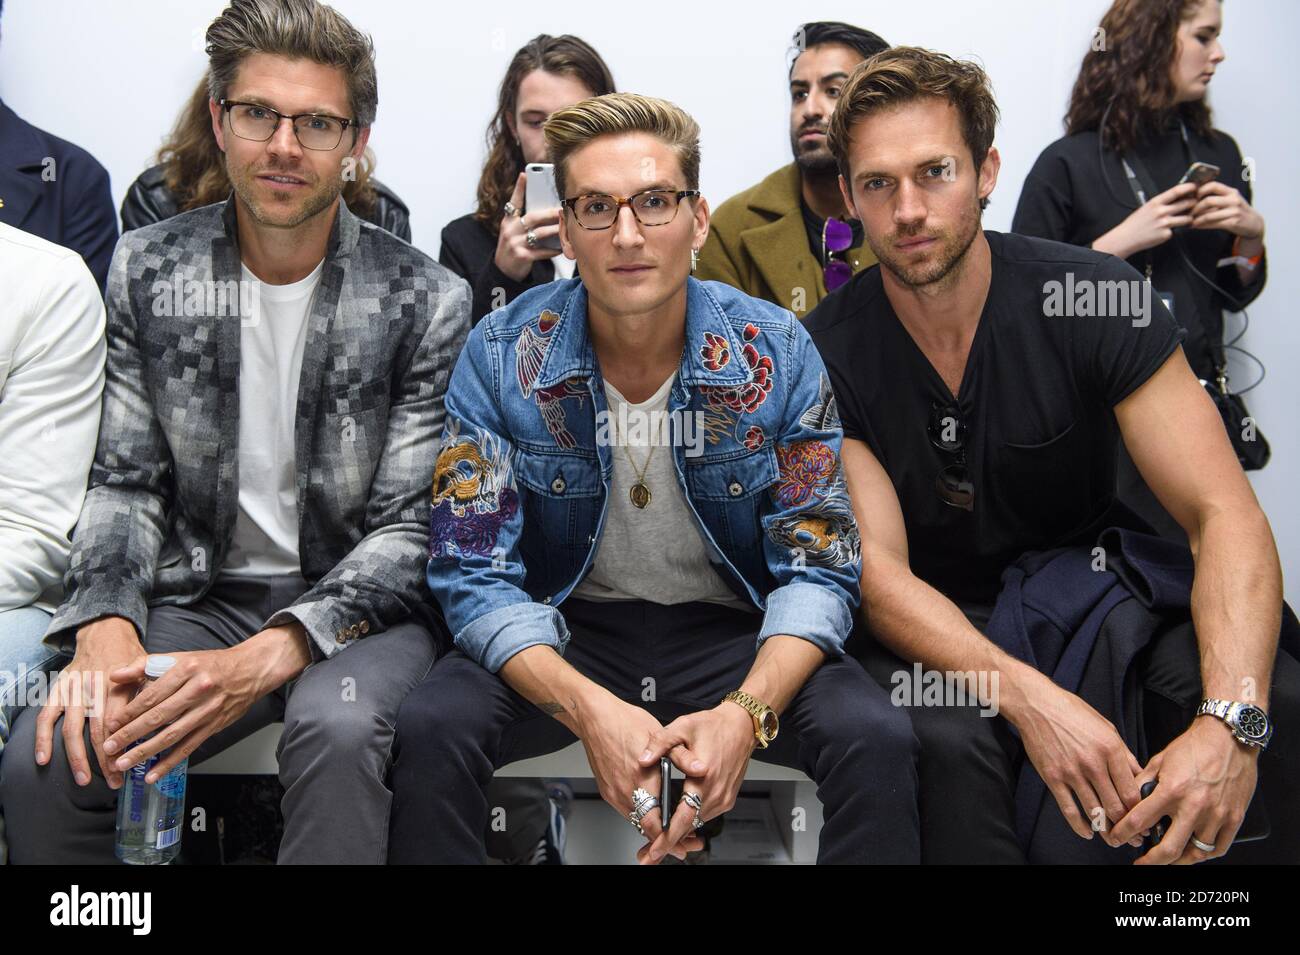 Darren Kennedy, Oliver Proudlock and Andrew Cooper on the front row at the Christopher Raeburn fashion show, held at the BFC Venue on 180 Strand as part of London Collections: Men,  Stock Photo